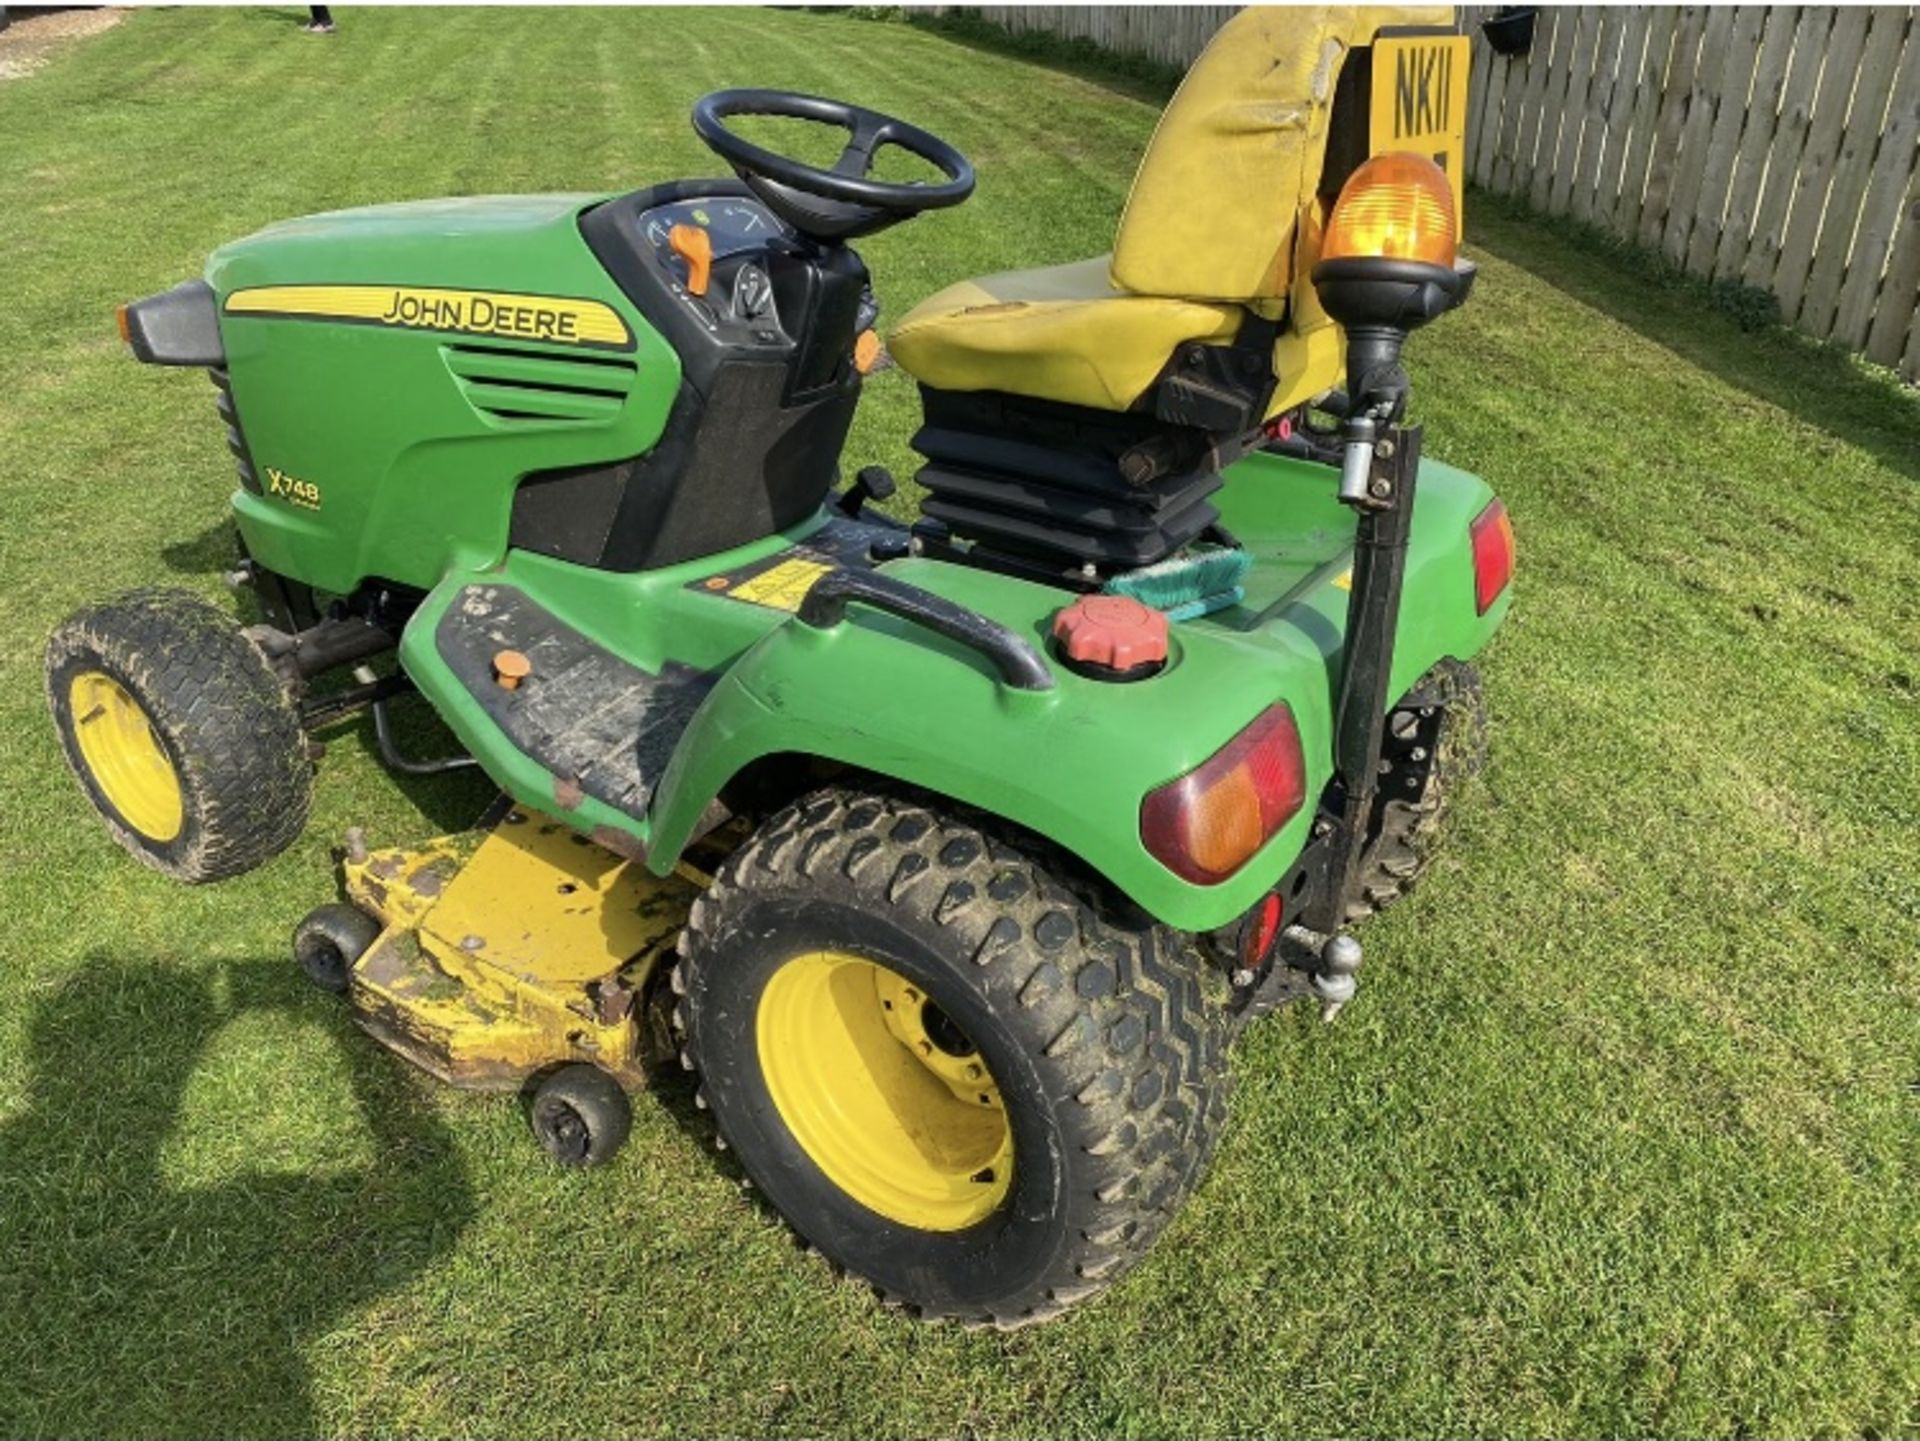 JOHN DEERE X748 DIESEL 4WD COMPANY TRACTOR RIDE ON MOWER LOCATION NORTH YORKSHIRE - Image 2 of 6